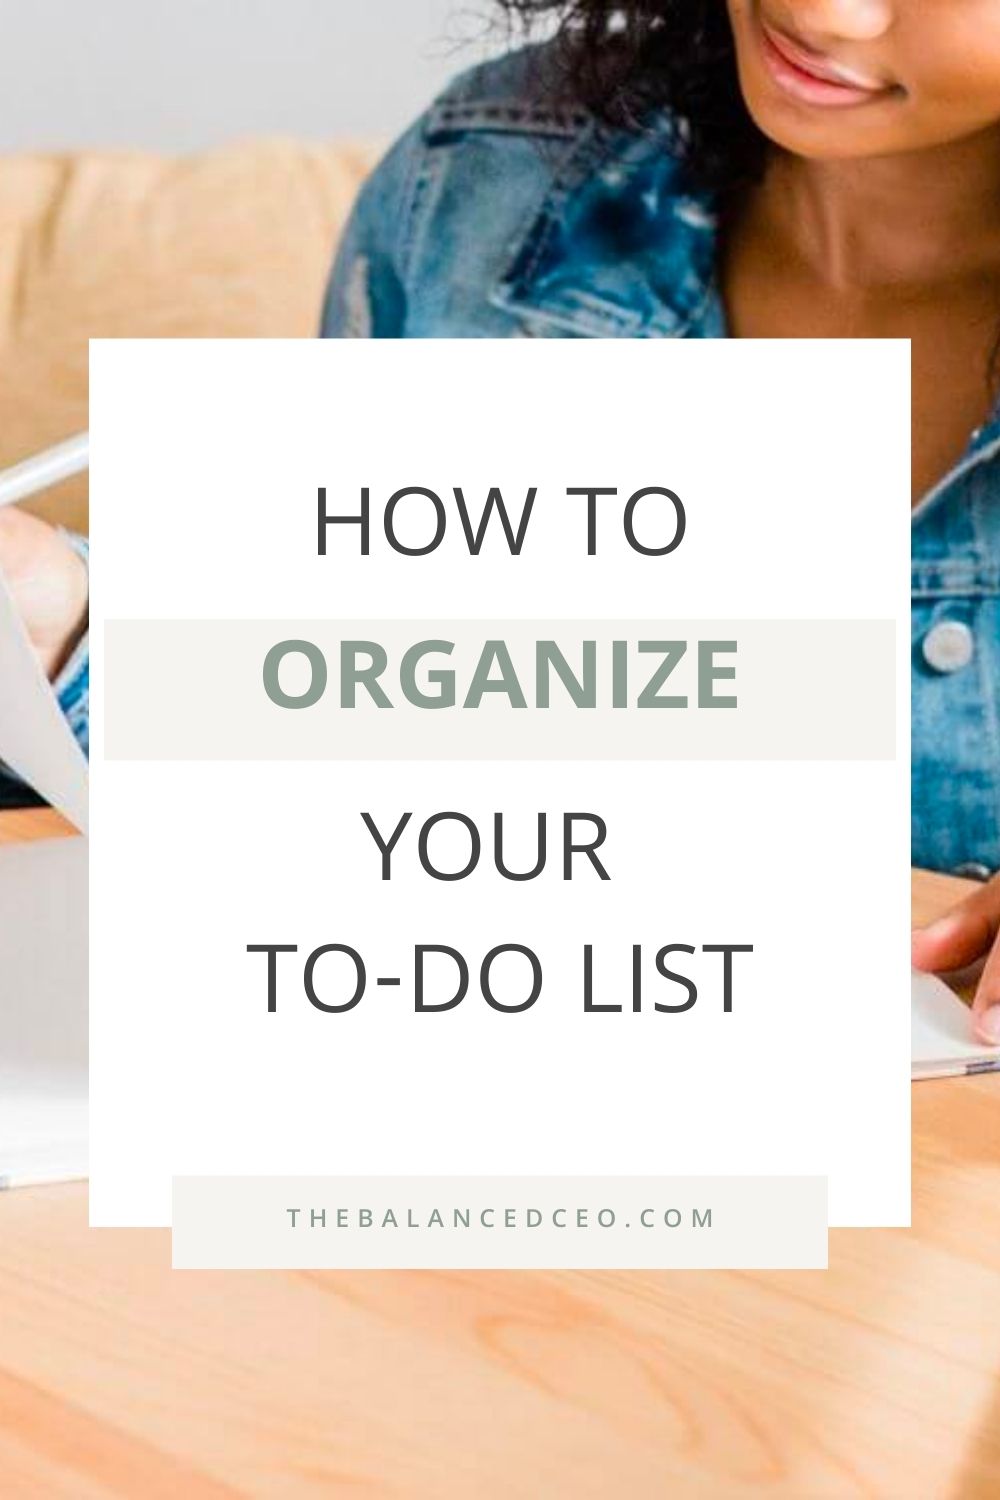 How to Organize Your To-Do List